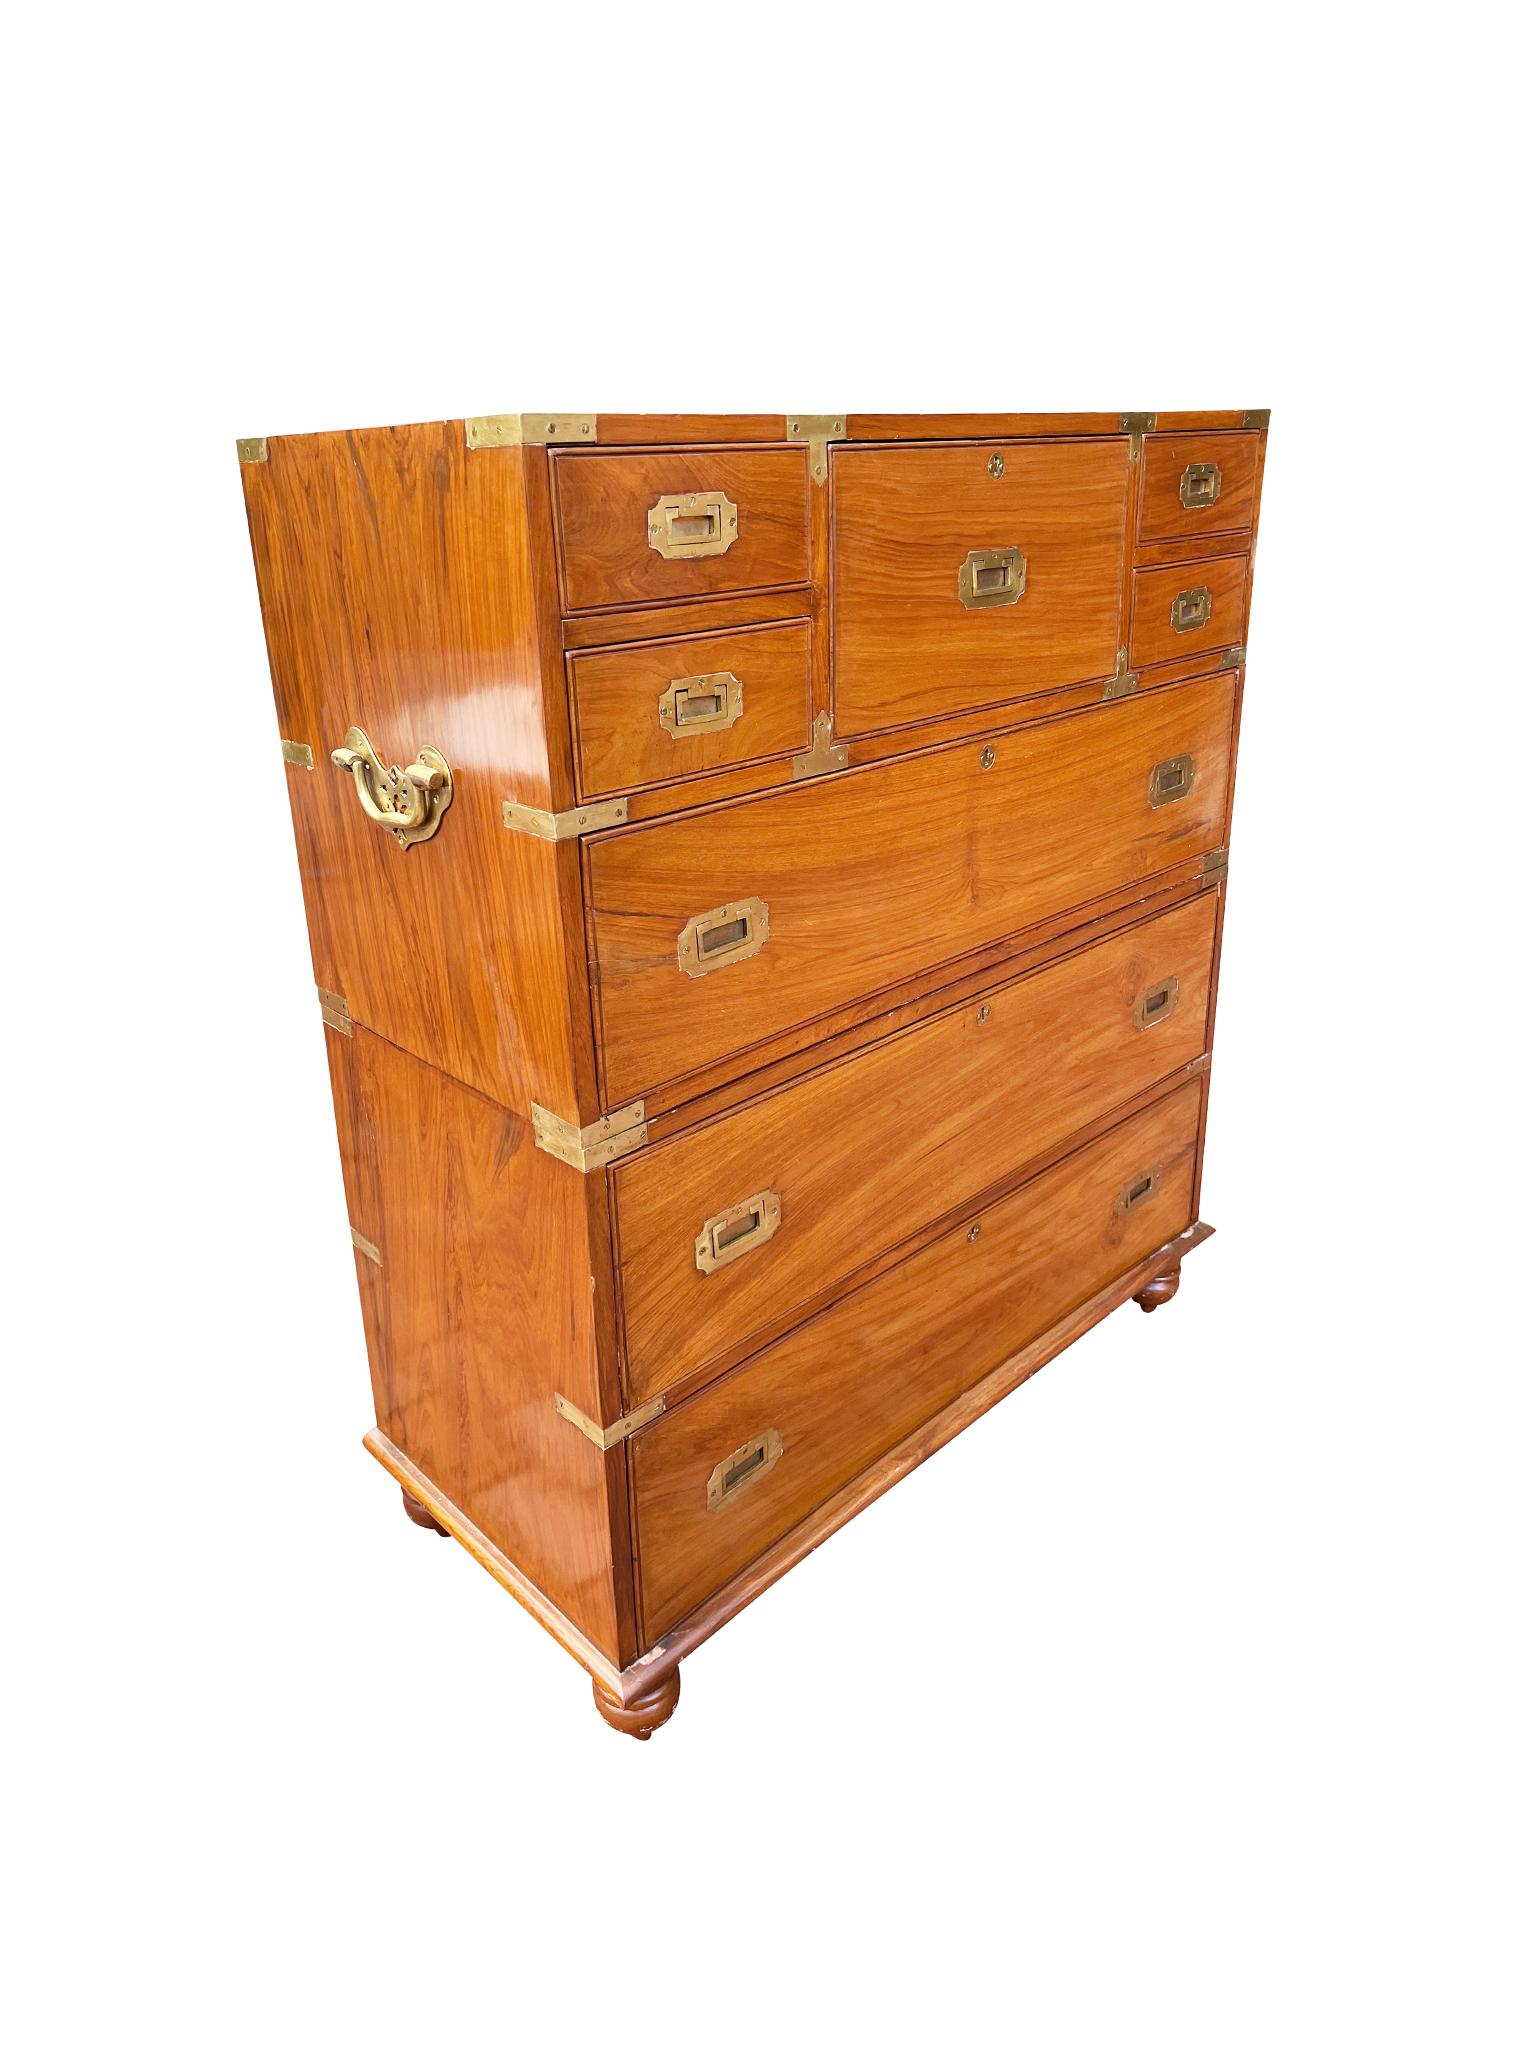 This 19th Century English Campaign chest of drawers consists of 2 case pieces hand-crafted from camphorwood with brass inset pulls, brass mounts, brass bail handles, and bun feet. The upper case has 5 small drawers atop a full-length drawer, while